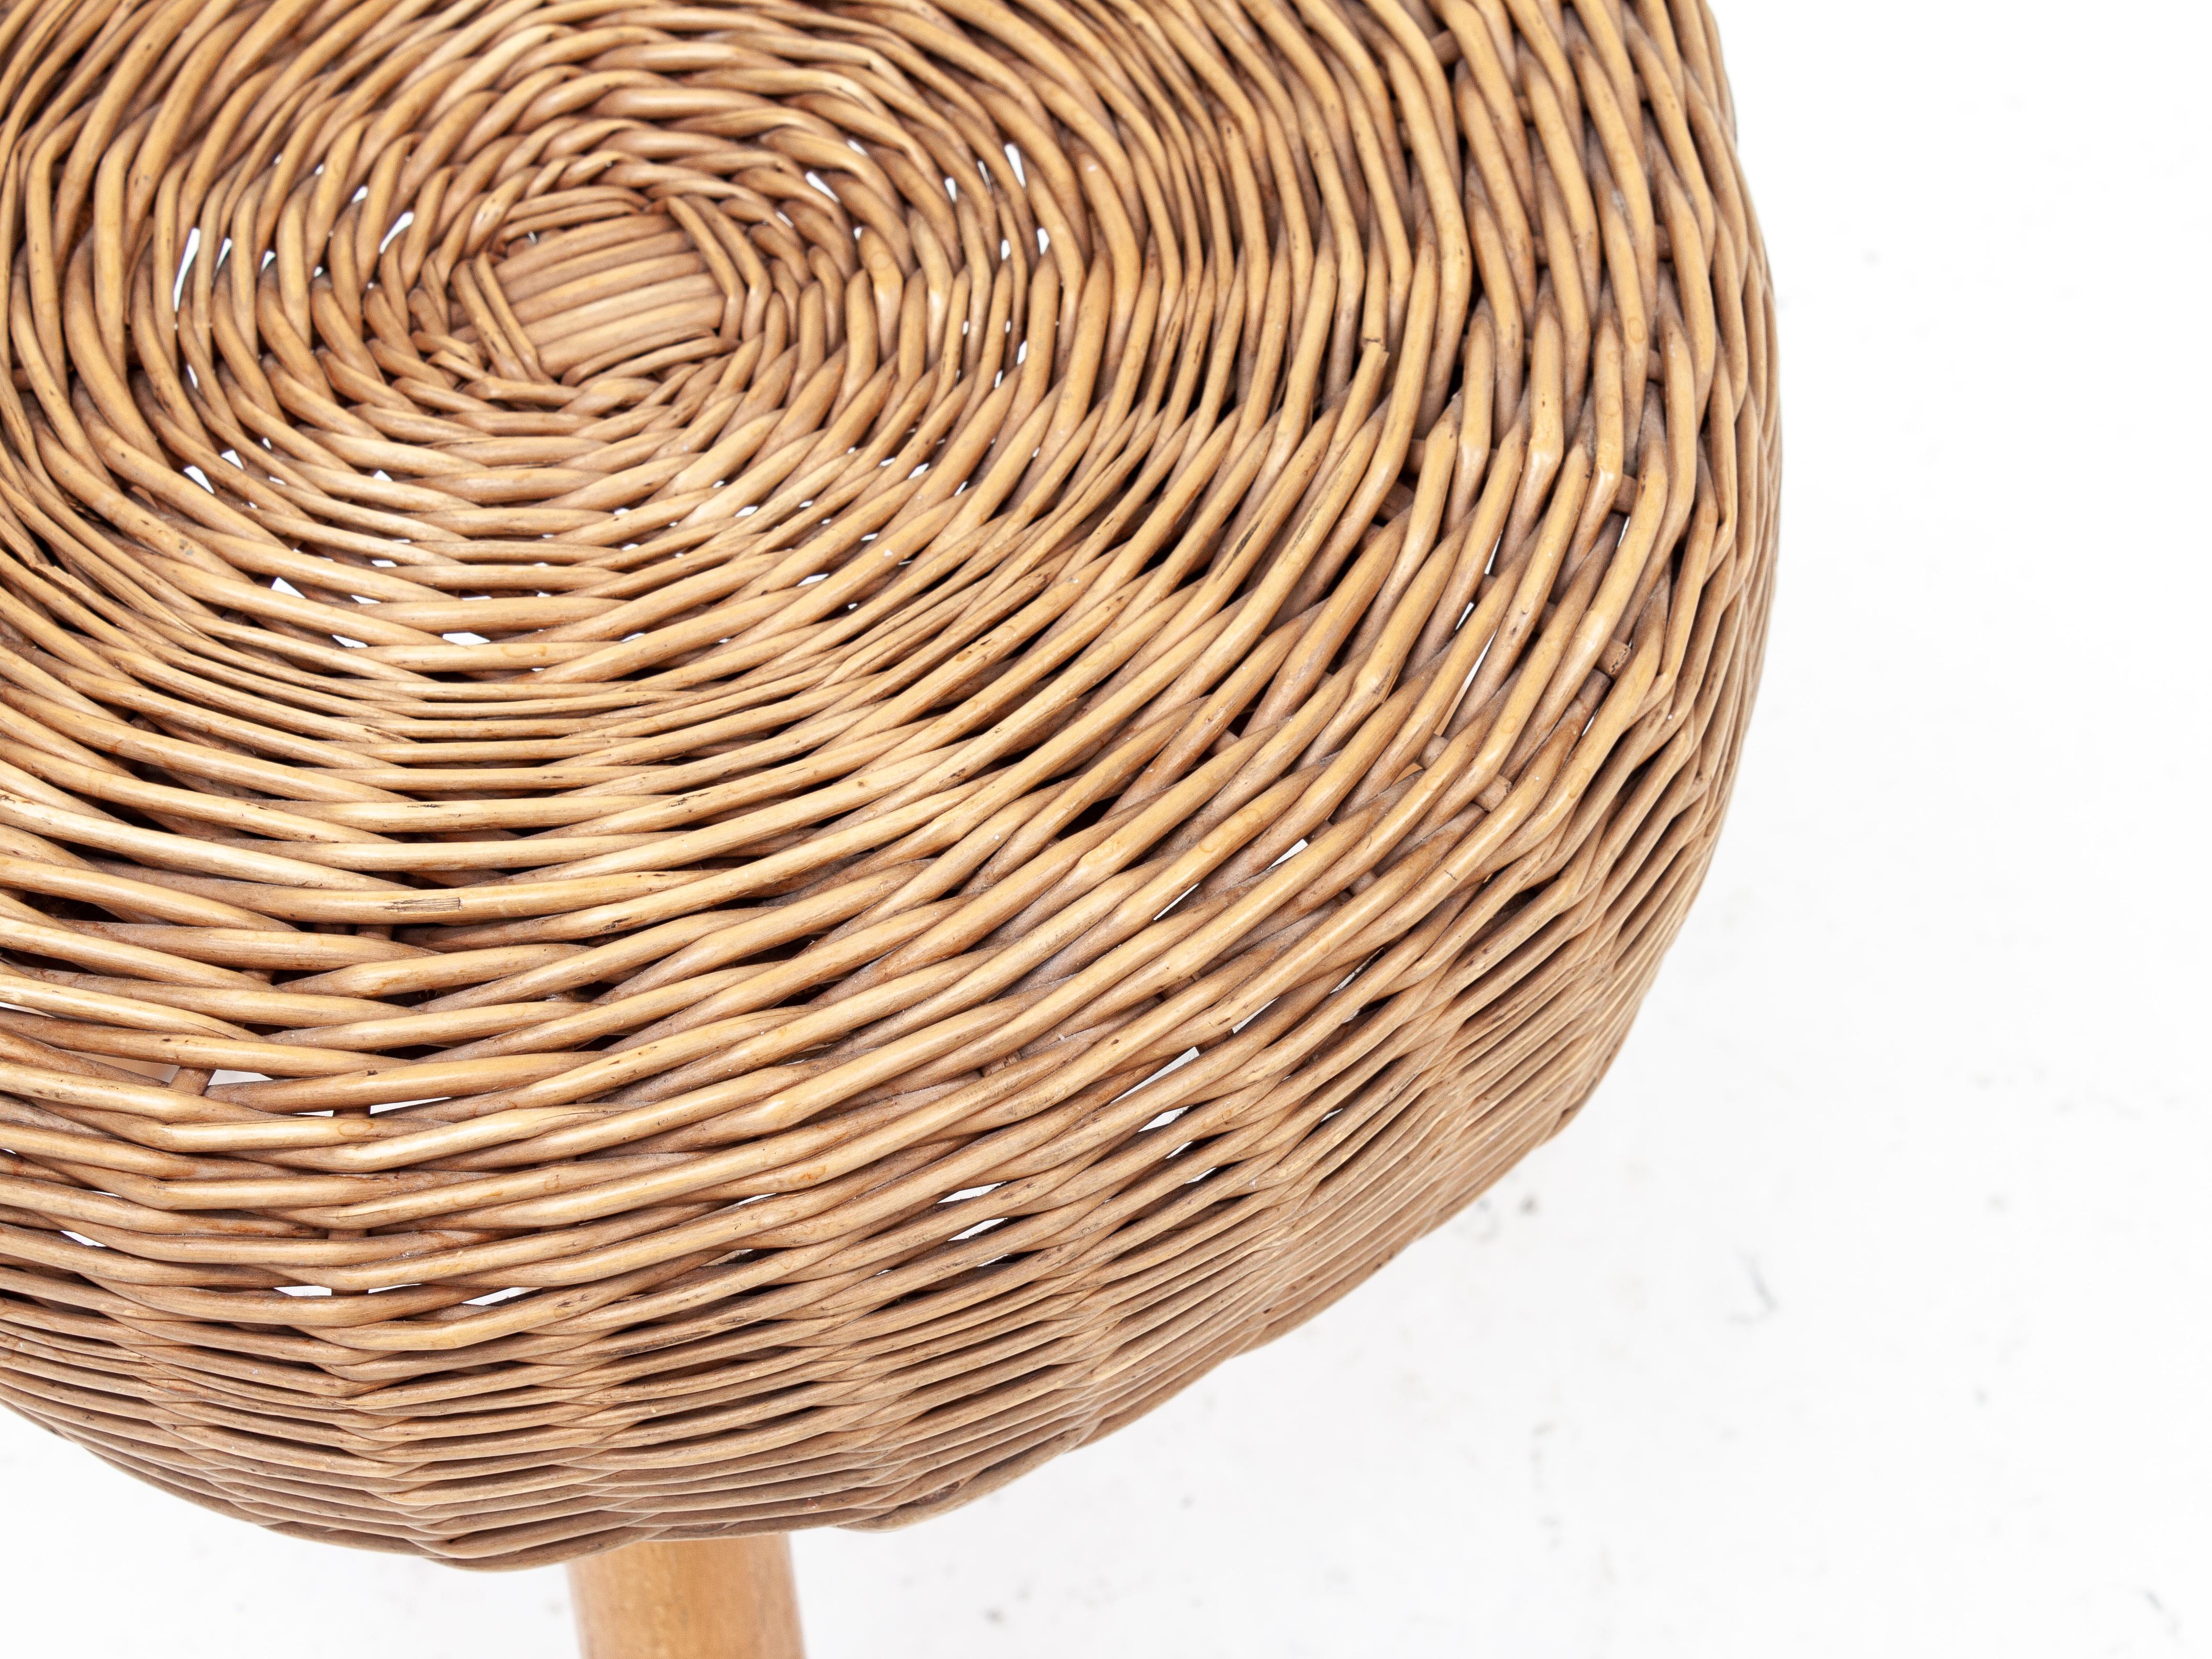 Tony Paul Attributed Wicker Stool, 1950/60s For Sale 4